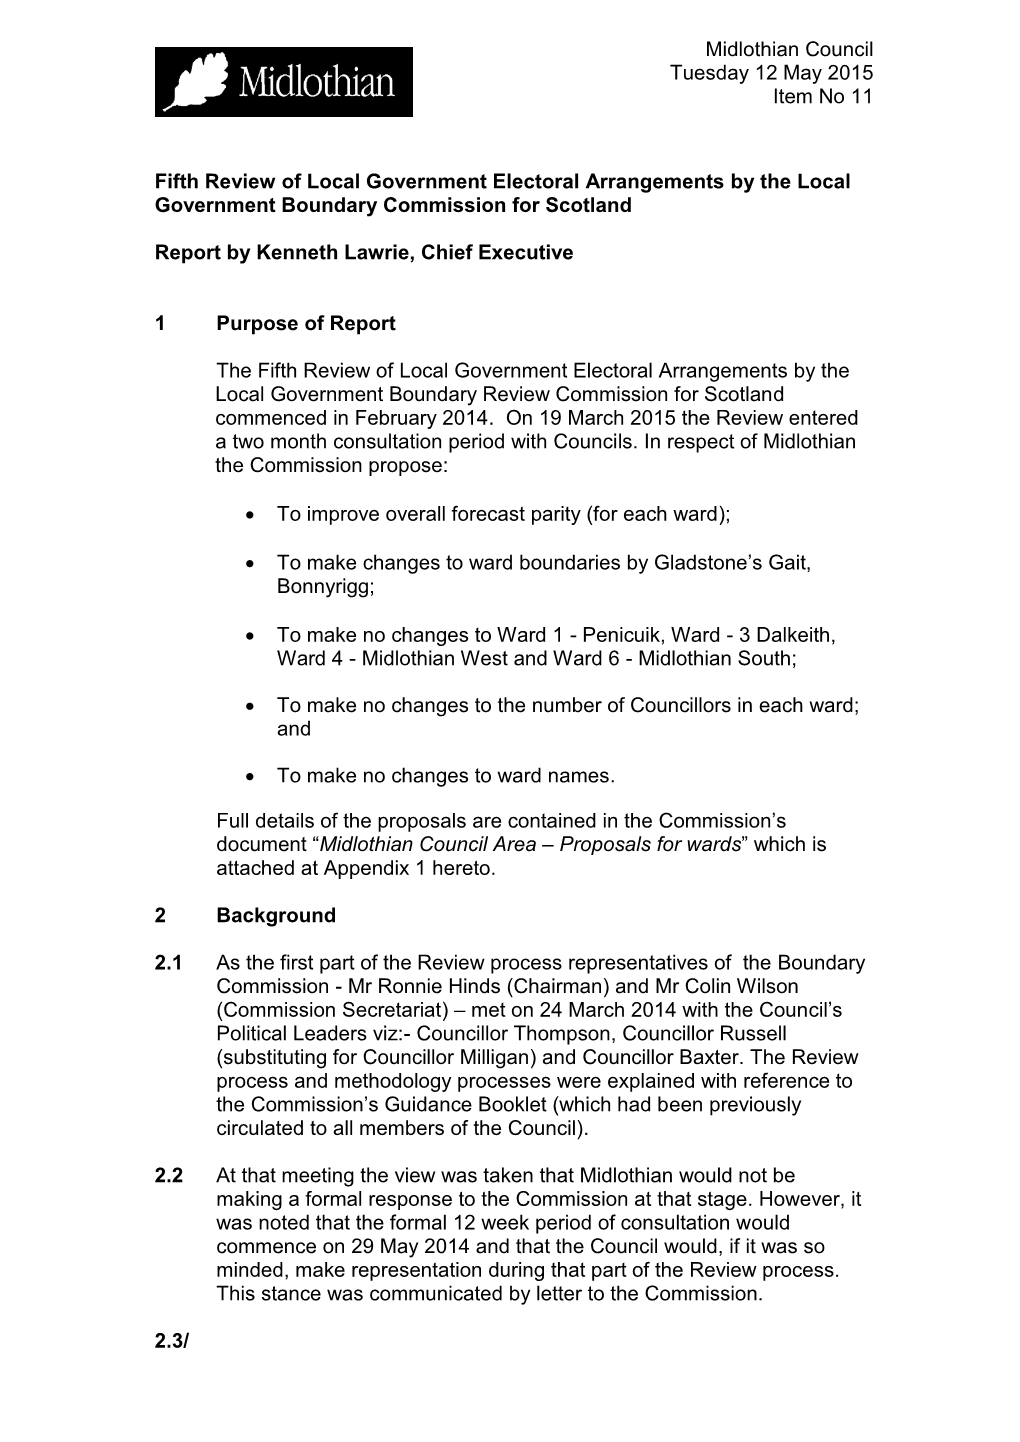 Midlothian Council Tuesday 12 May 2015 Item No 11 Fifth Review Of